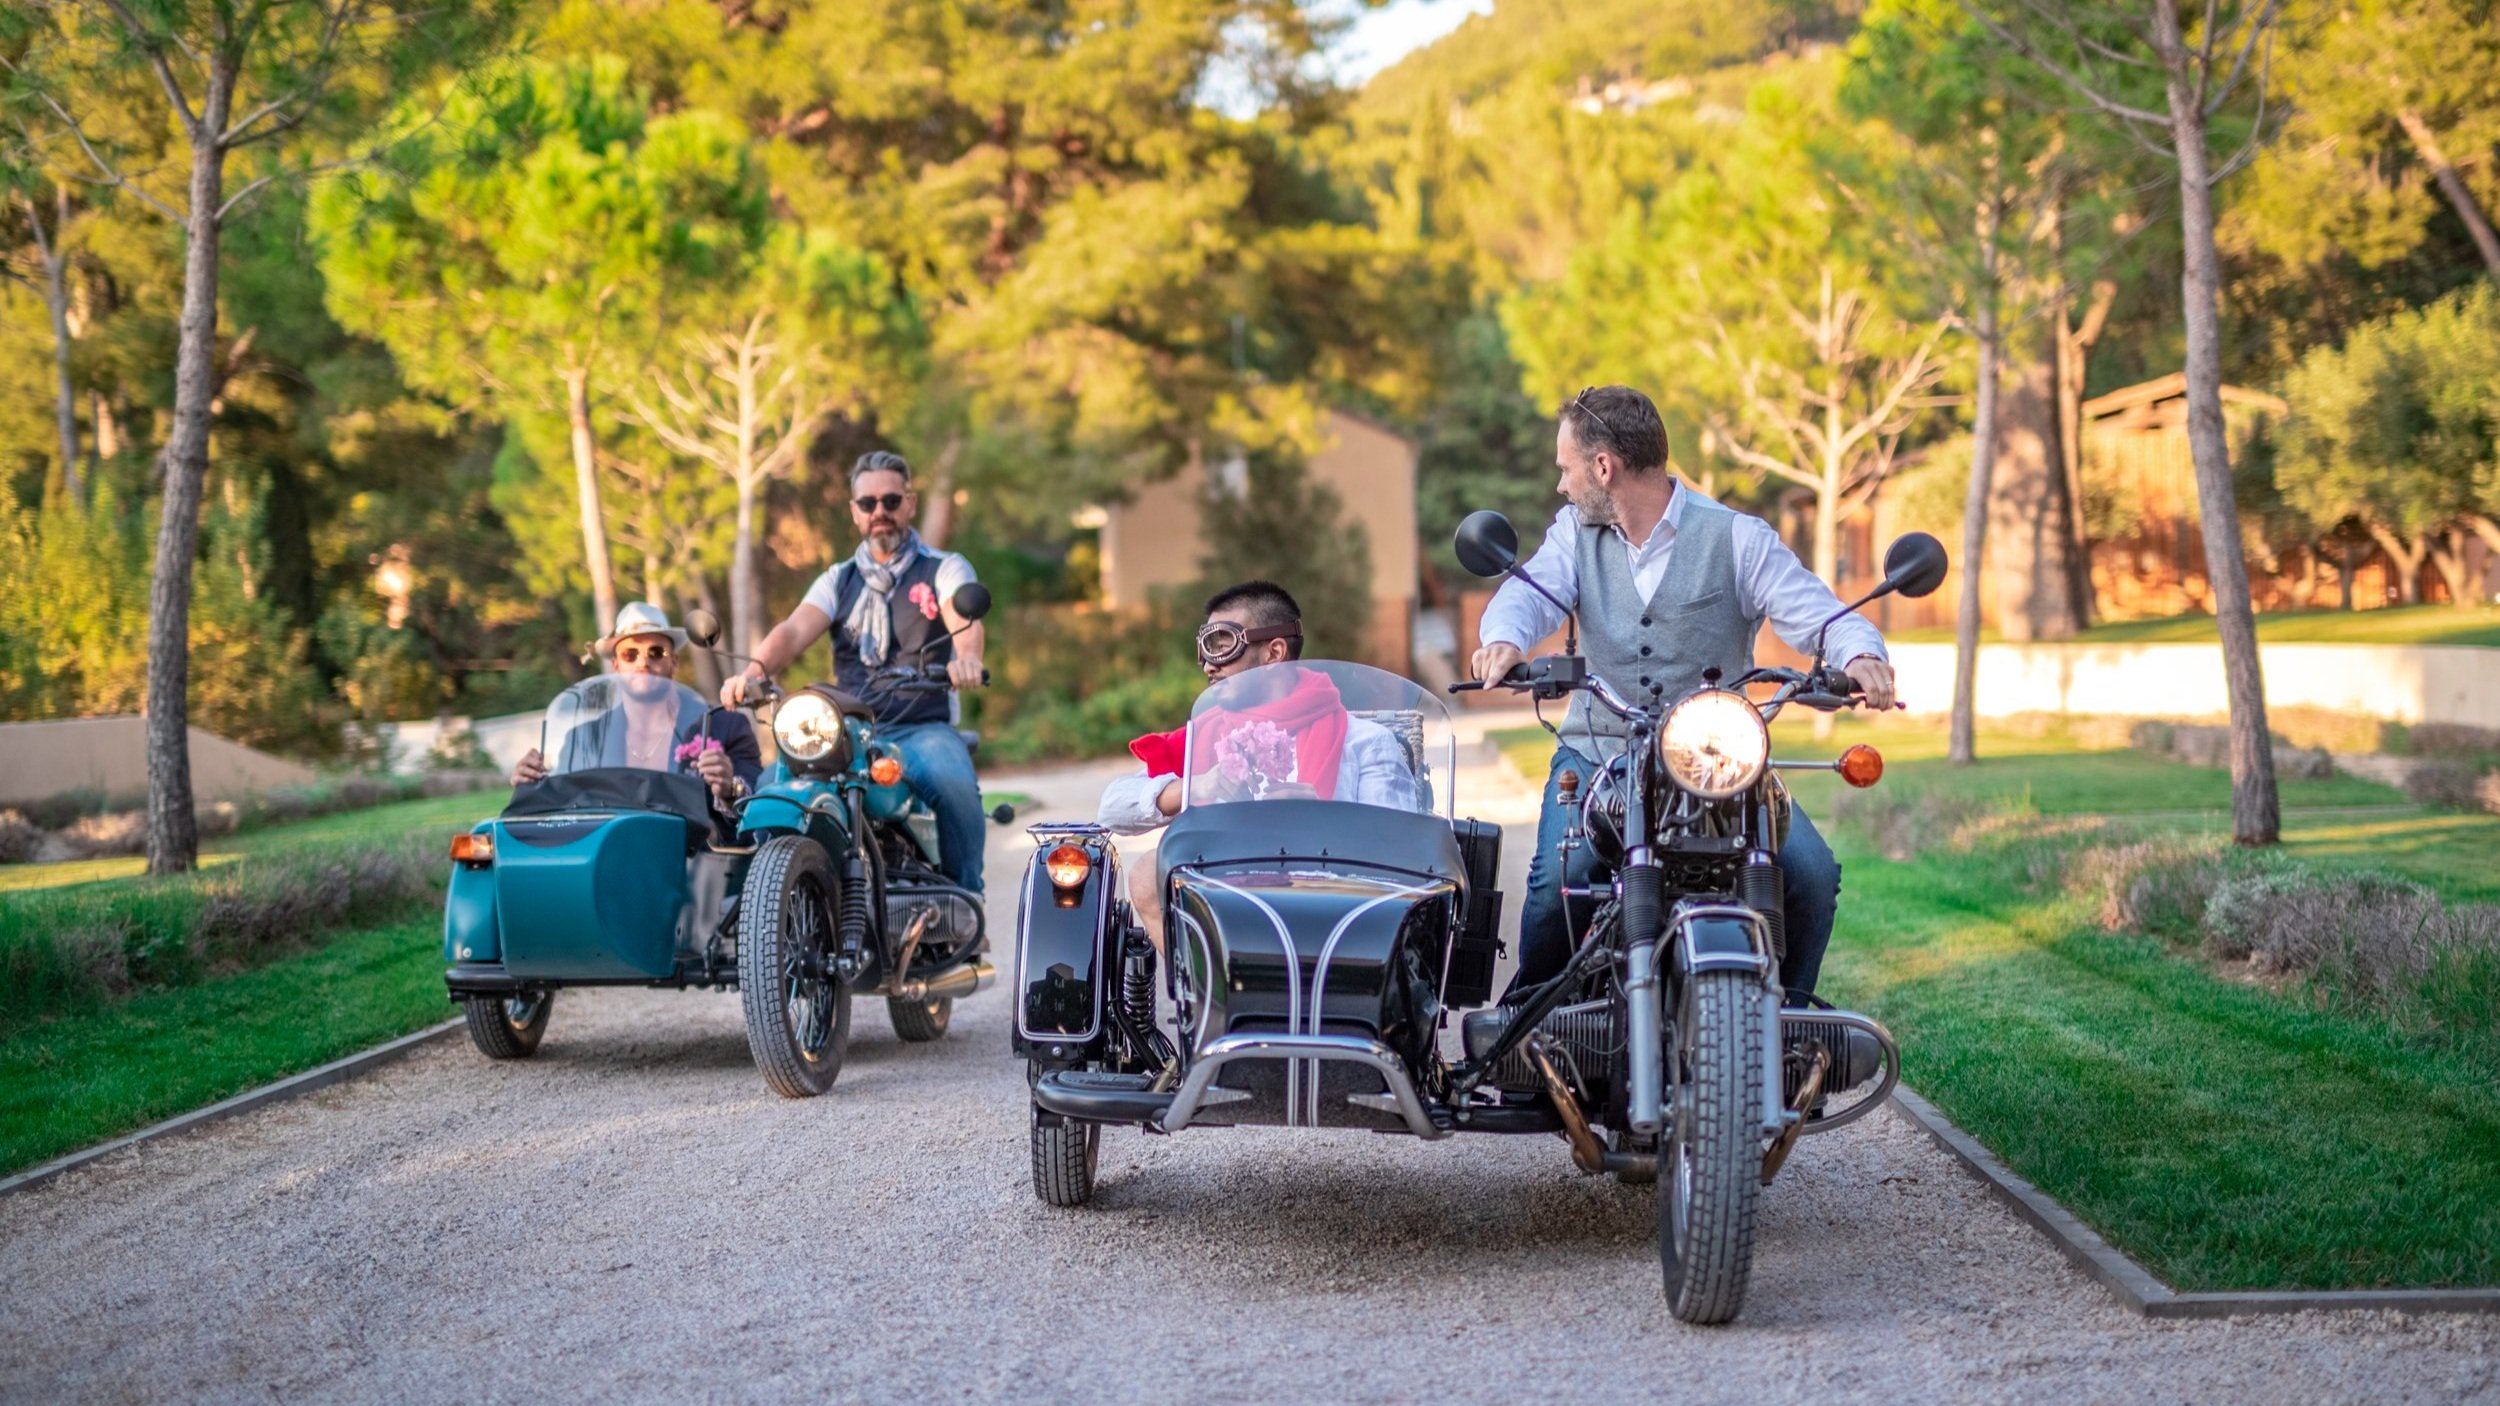 Group of guests taking part in a seminar in a vintage motorcycle sidecar